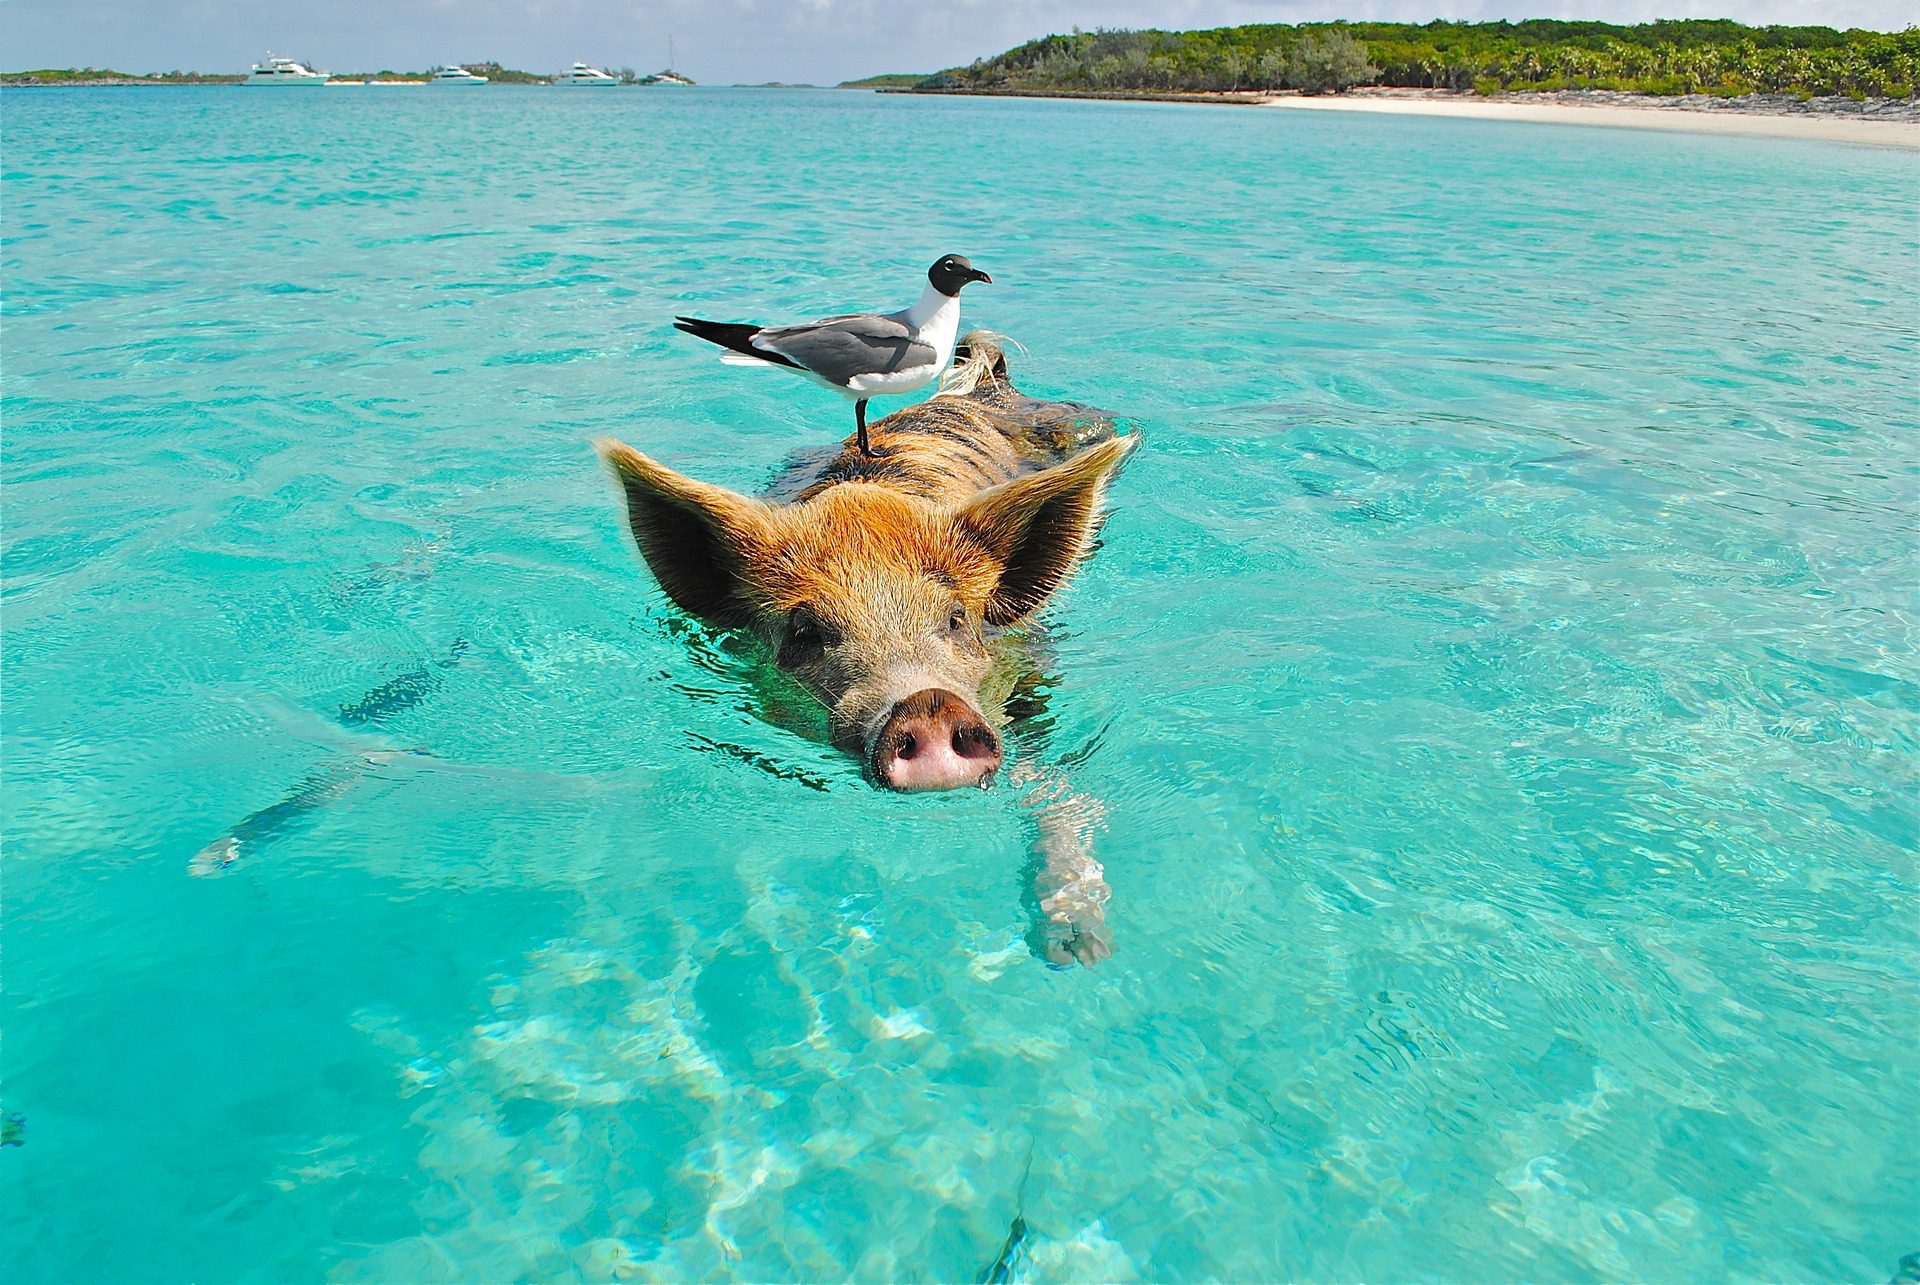 Weird Places: The Swimming Pigs Of The Bahamas - KLM Blog